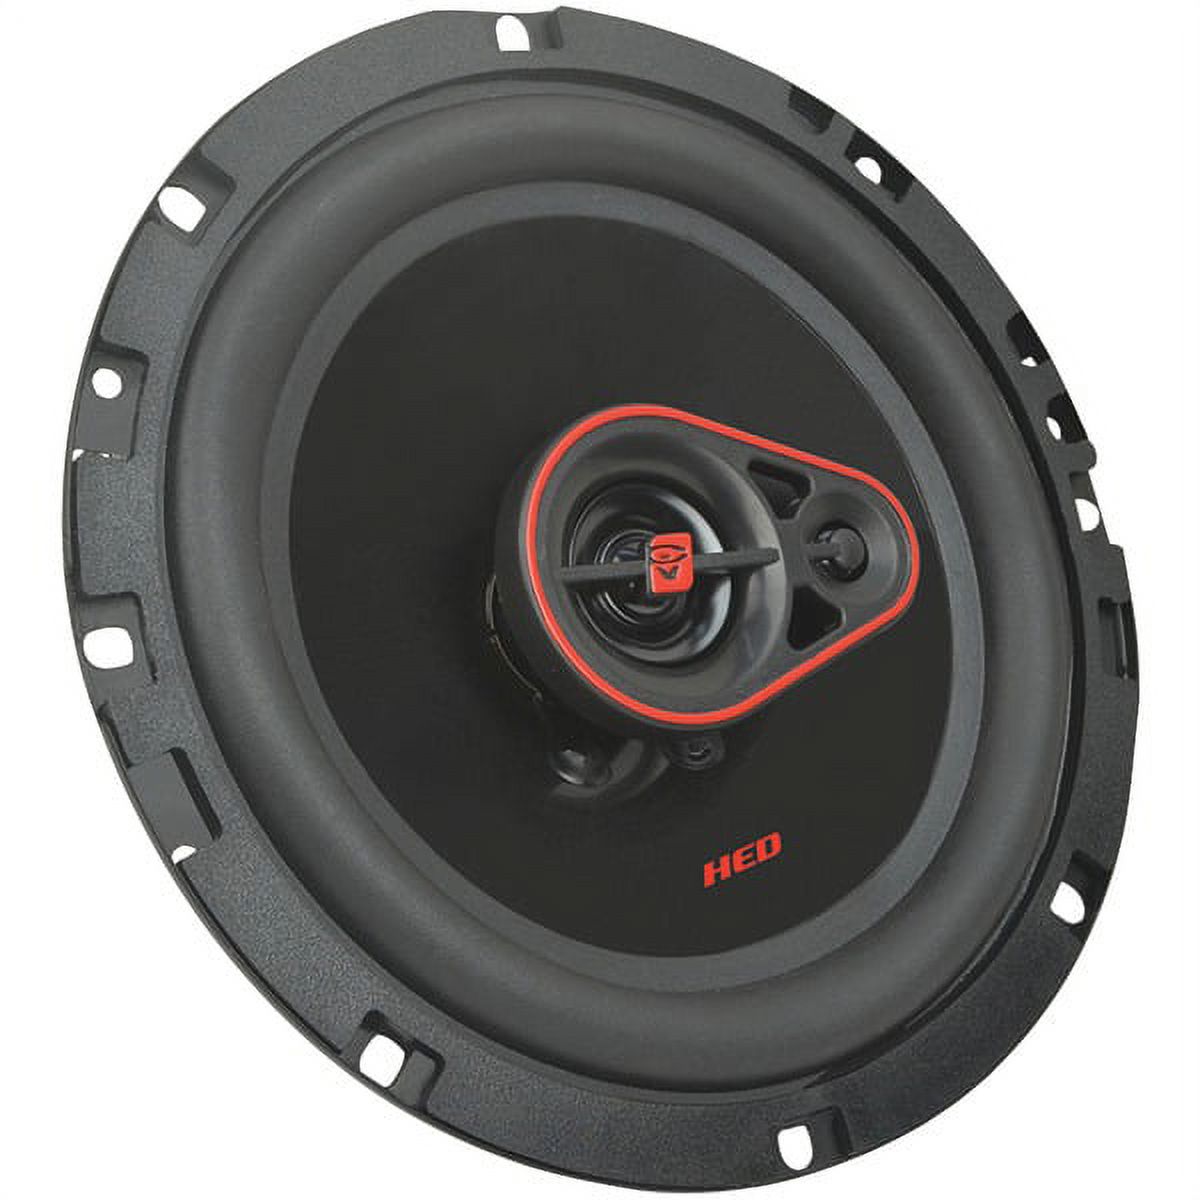 Cerwin-vega Mobile Cerwin-vega Mobile Hed Series 3-way Coaxial Speakers (6.5", 340 Watts Max) - image 1 of 1